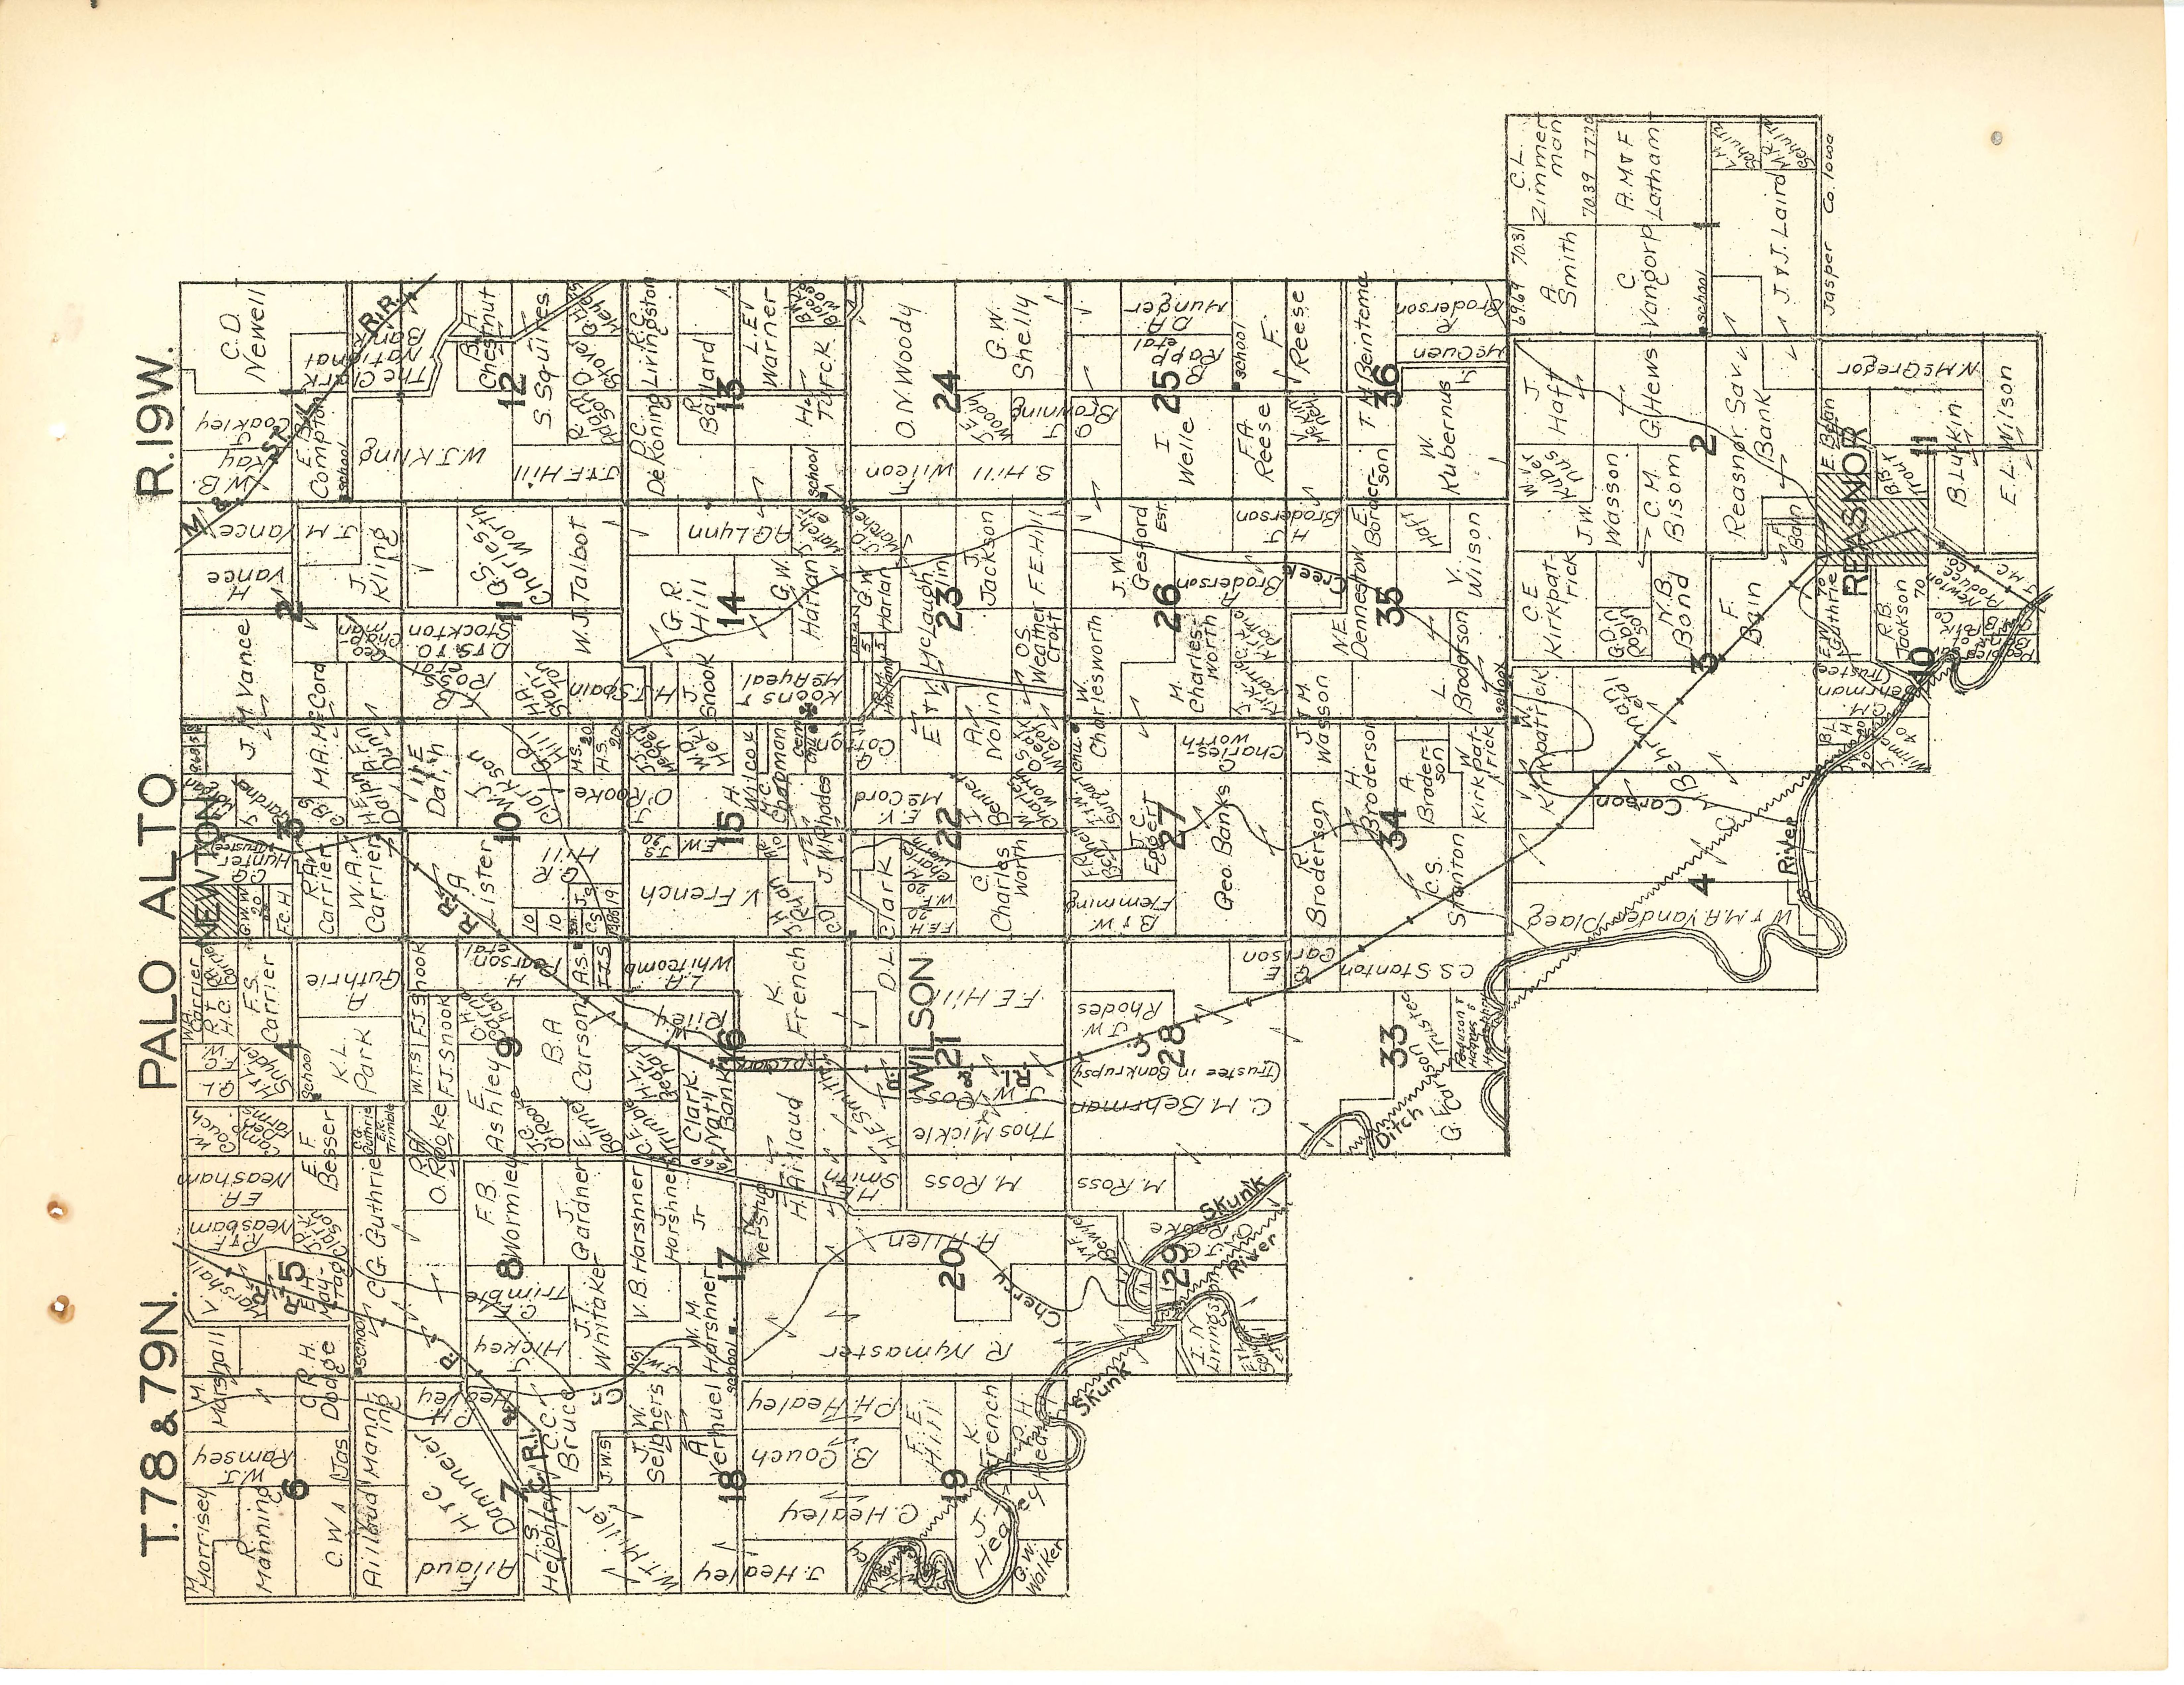 1930 plat map of Palo Alto Township in Jasper County, Iowa. Containing slightly more than 36 sections (even though it lacks Sections 30, 31 & 32), Palo Alto Township is one that was distorted from the usual 6-mile square to accommodate the meandering South Skunk River along its southwest corner.